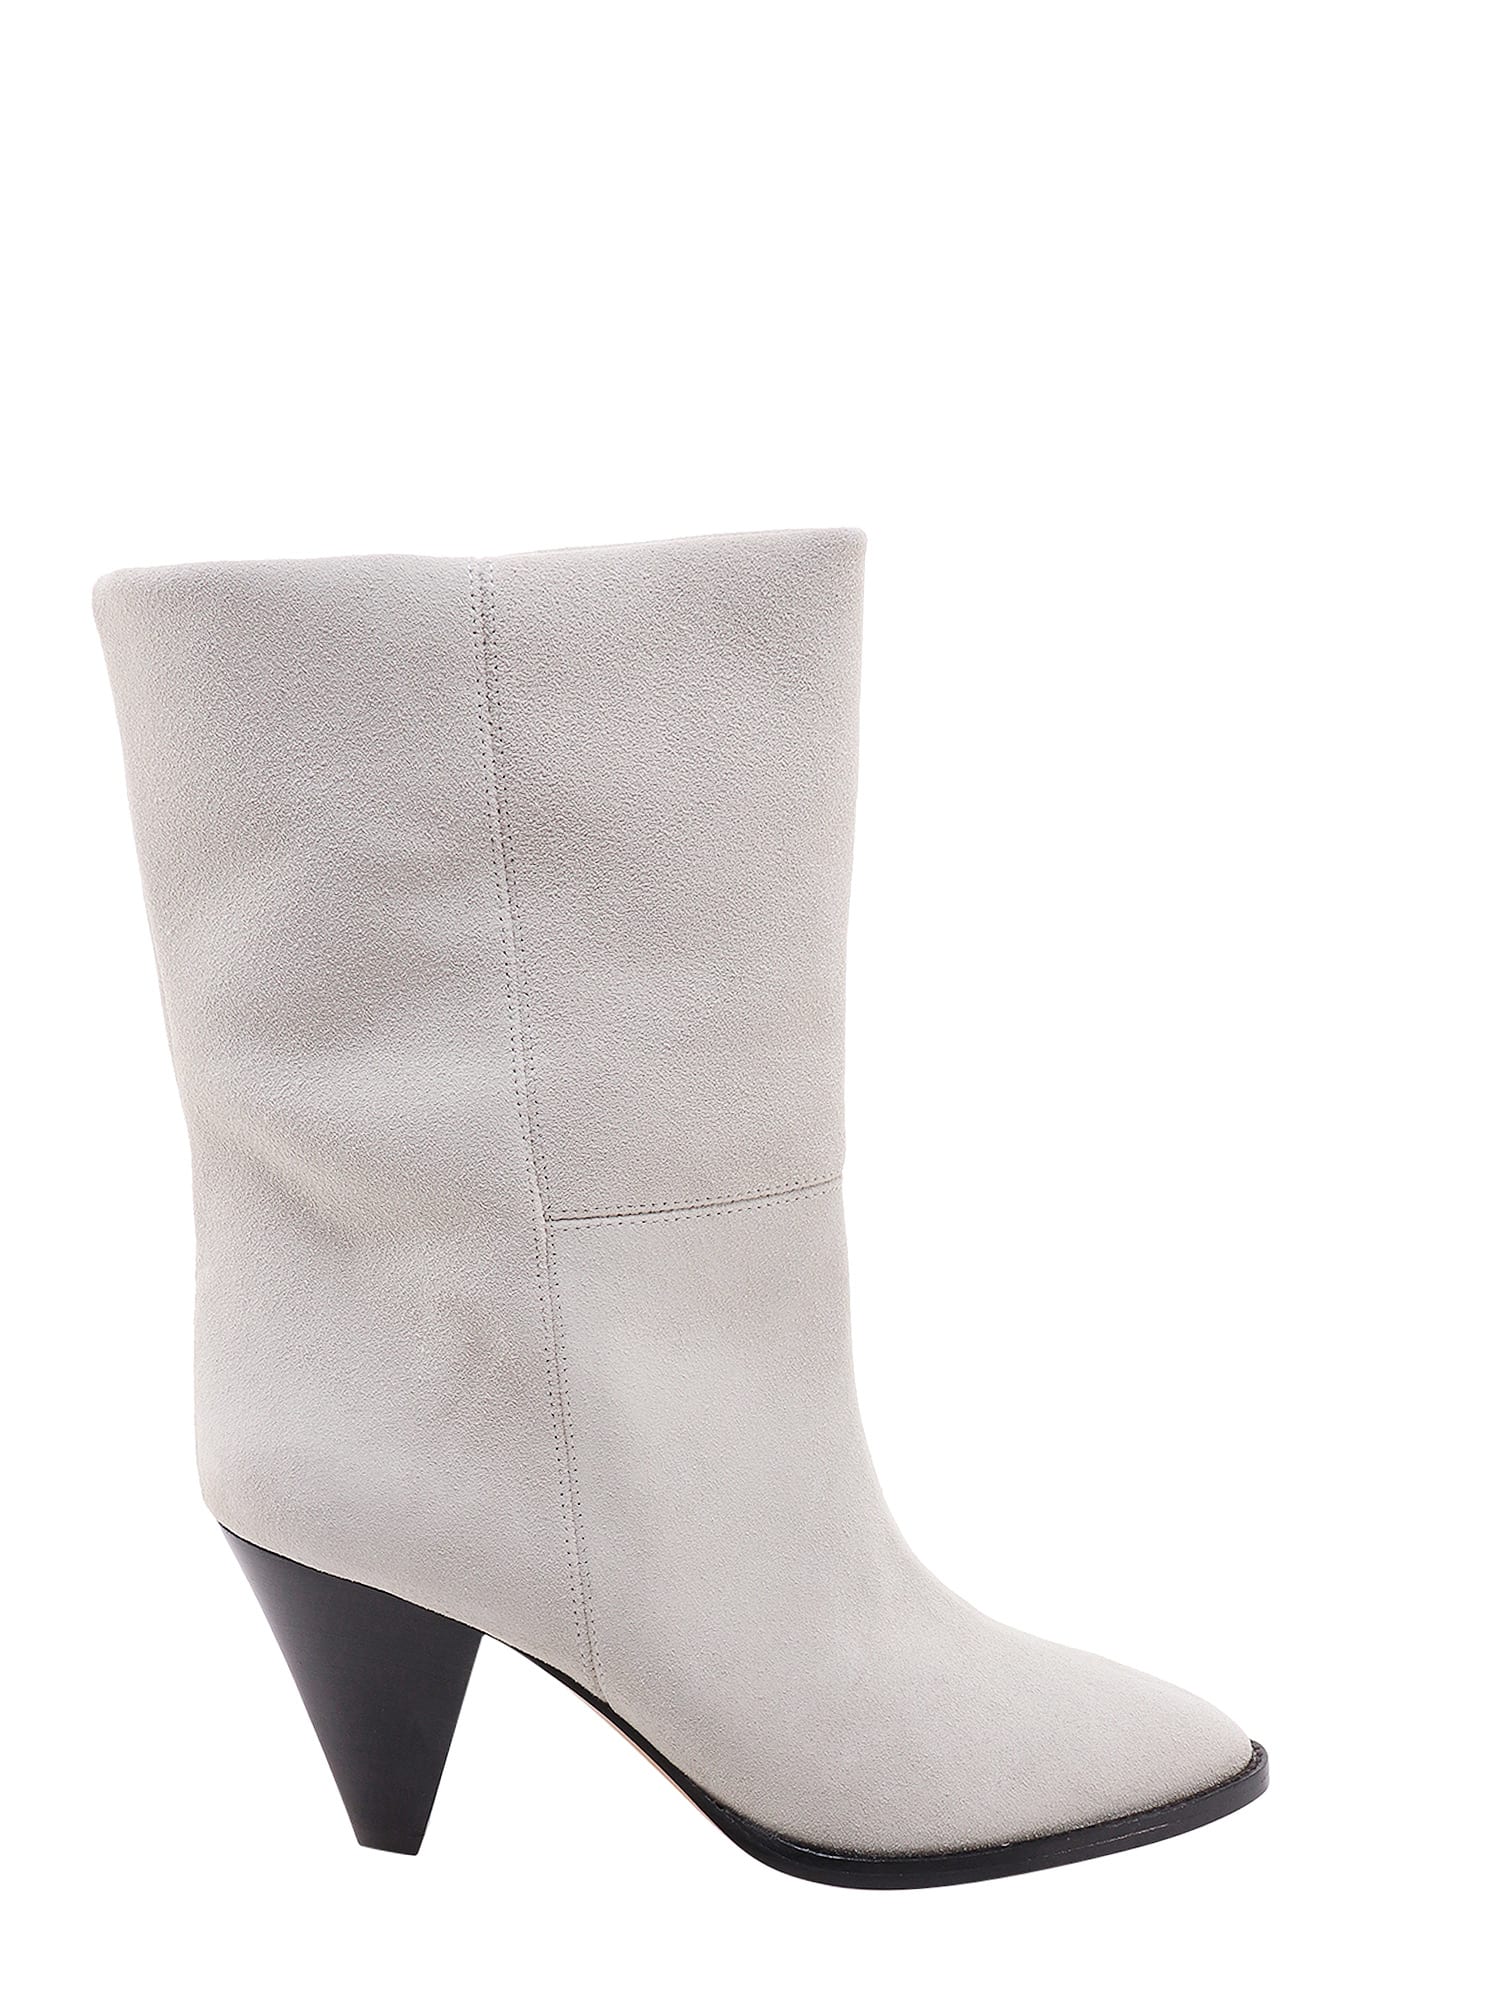 Rouxa High Heels Ankle Boots